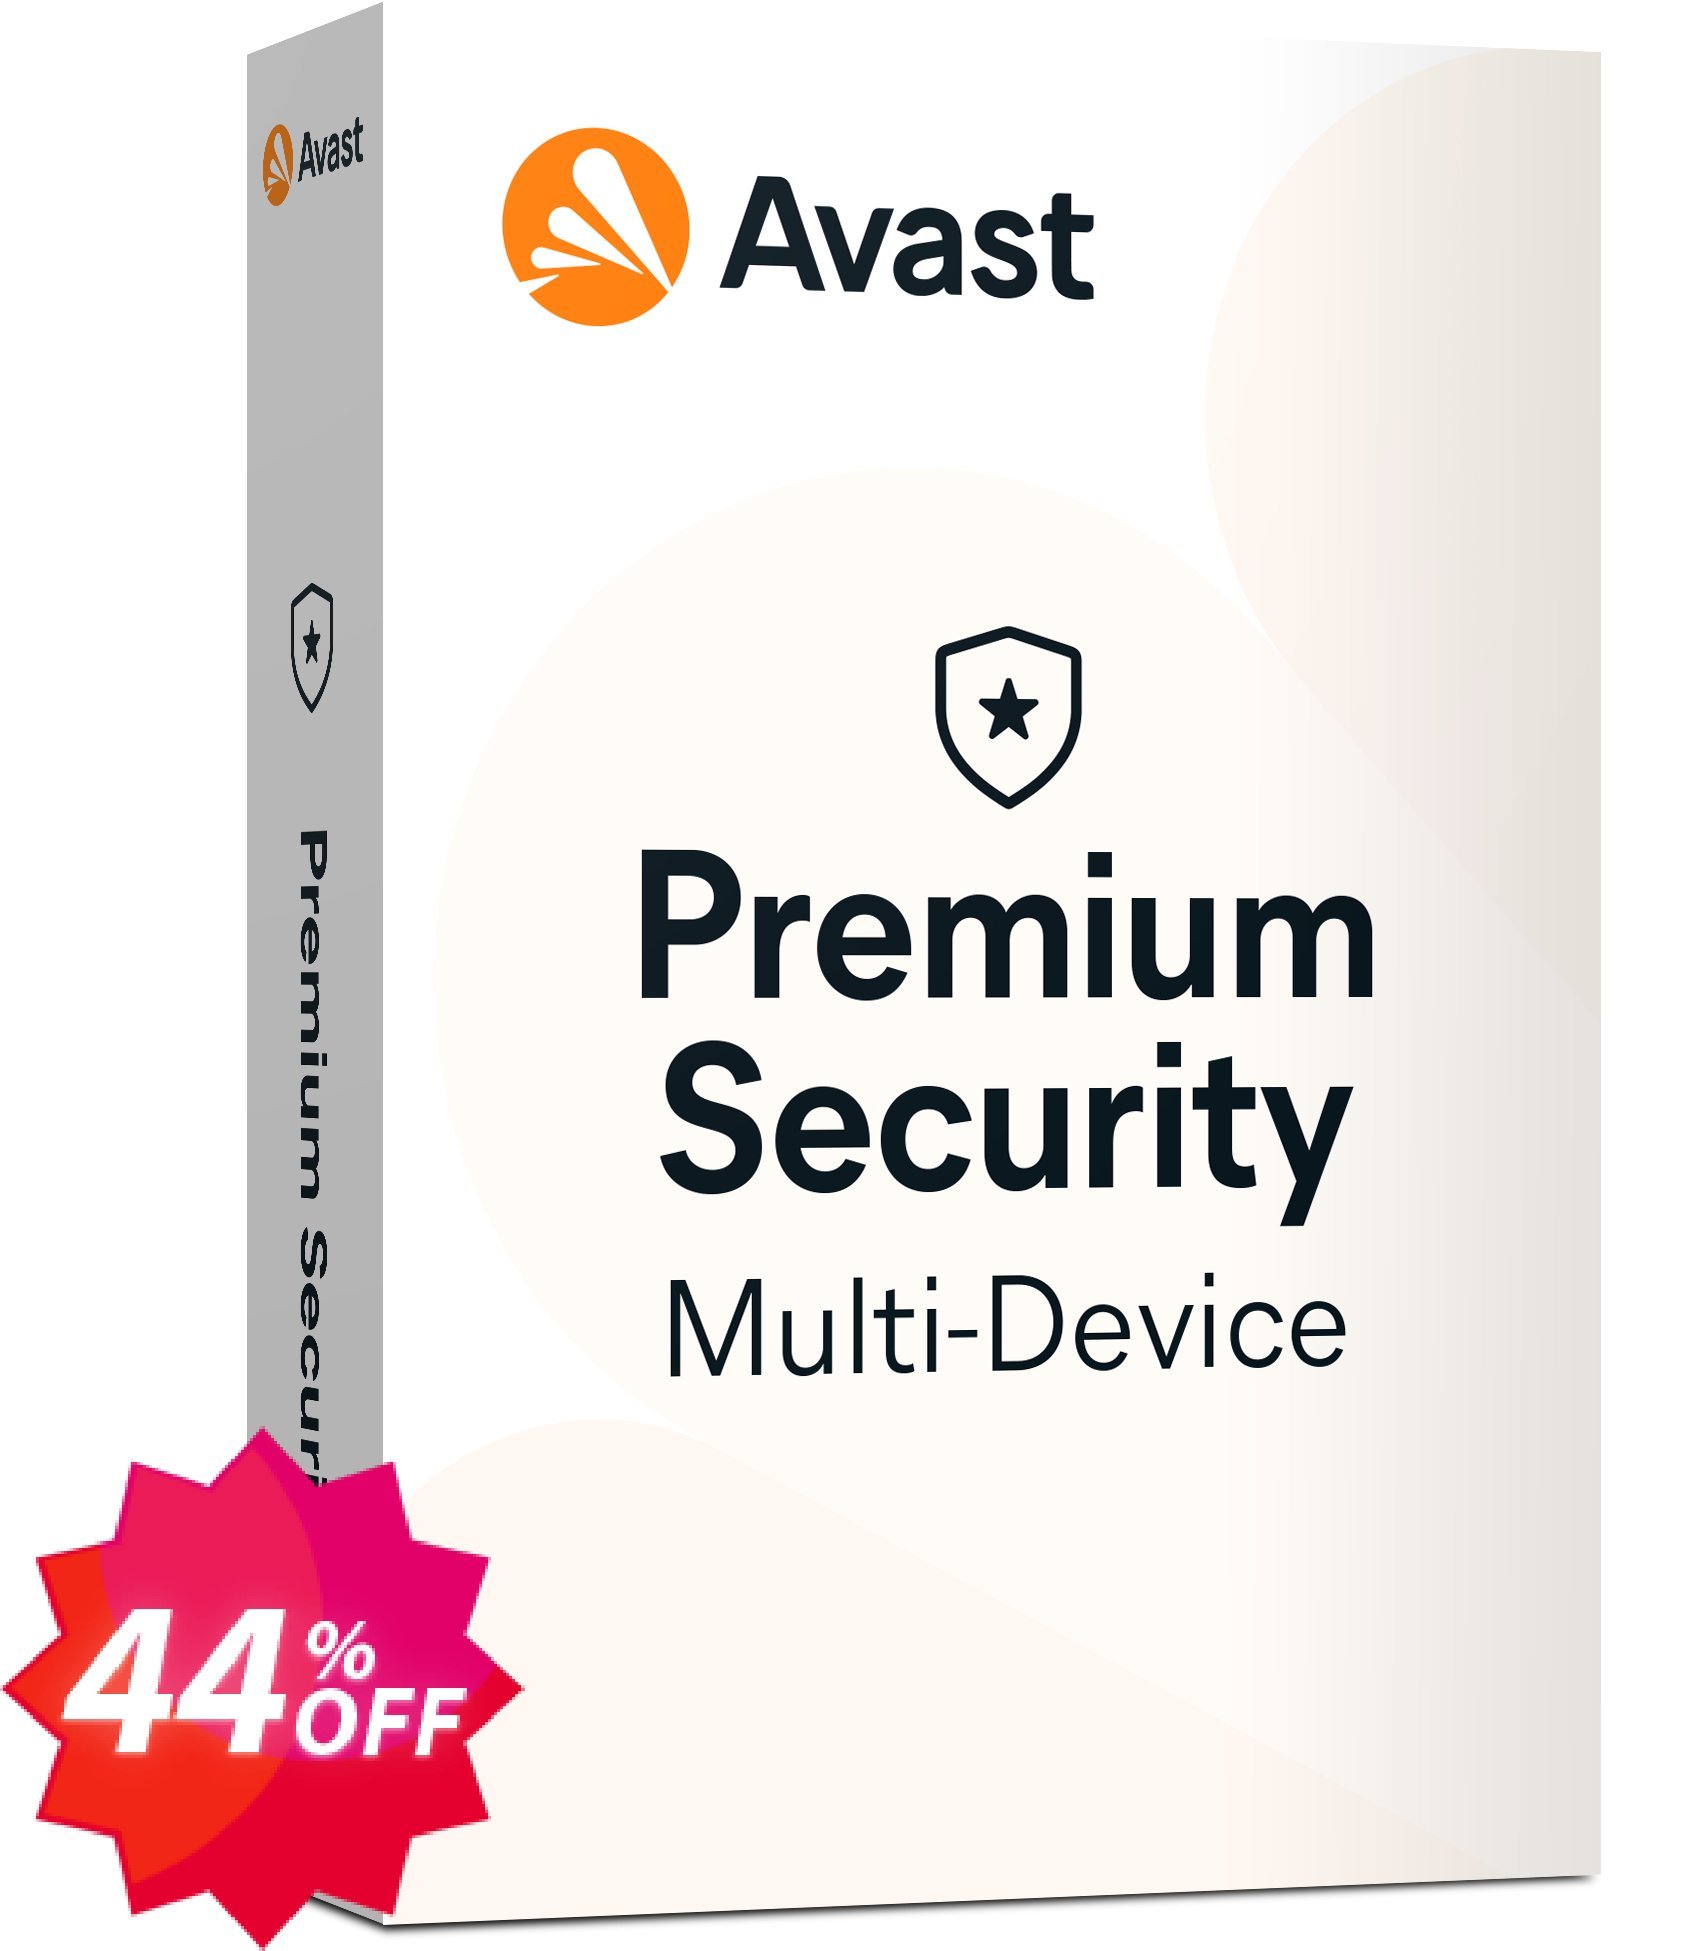 Avast Premium Security 10 Devices Coupon code 44% discount 